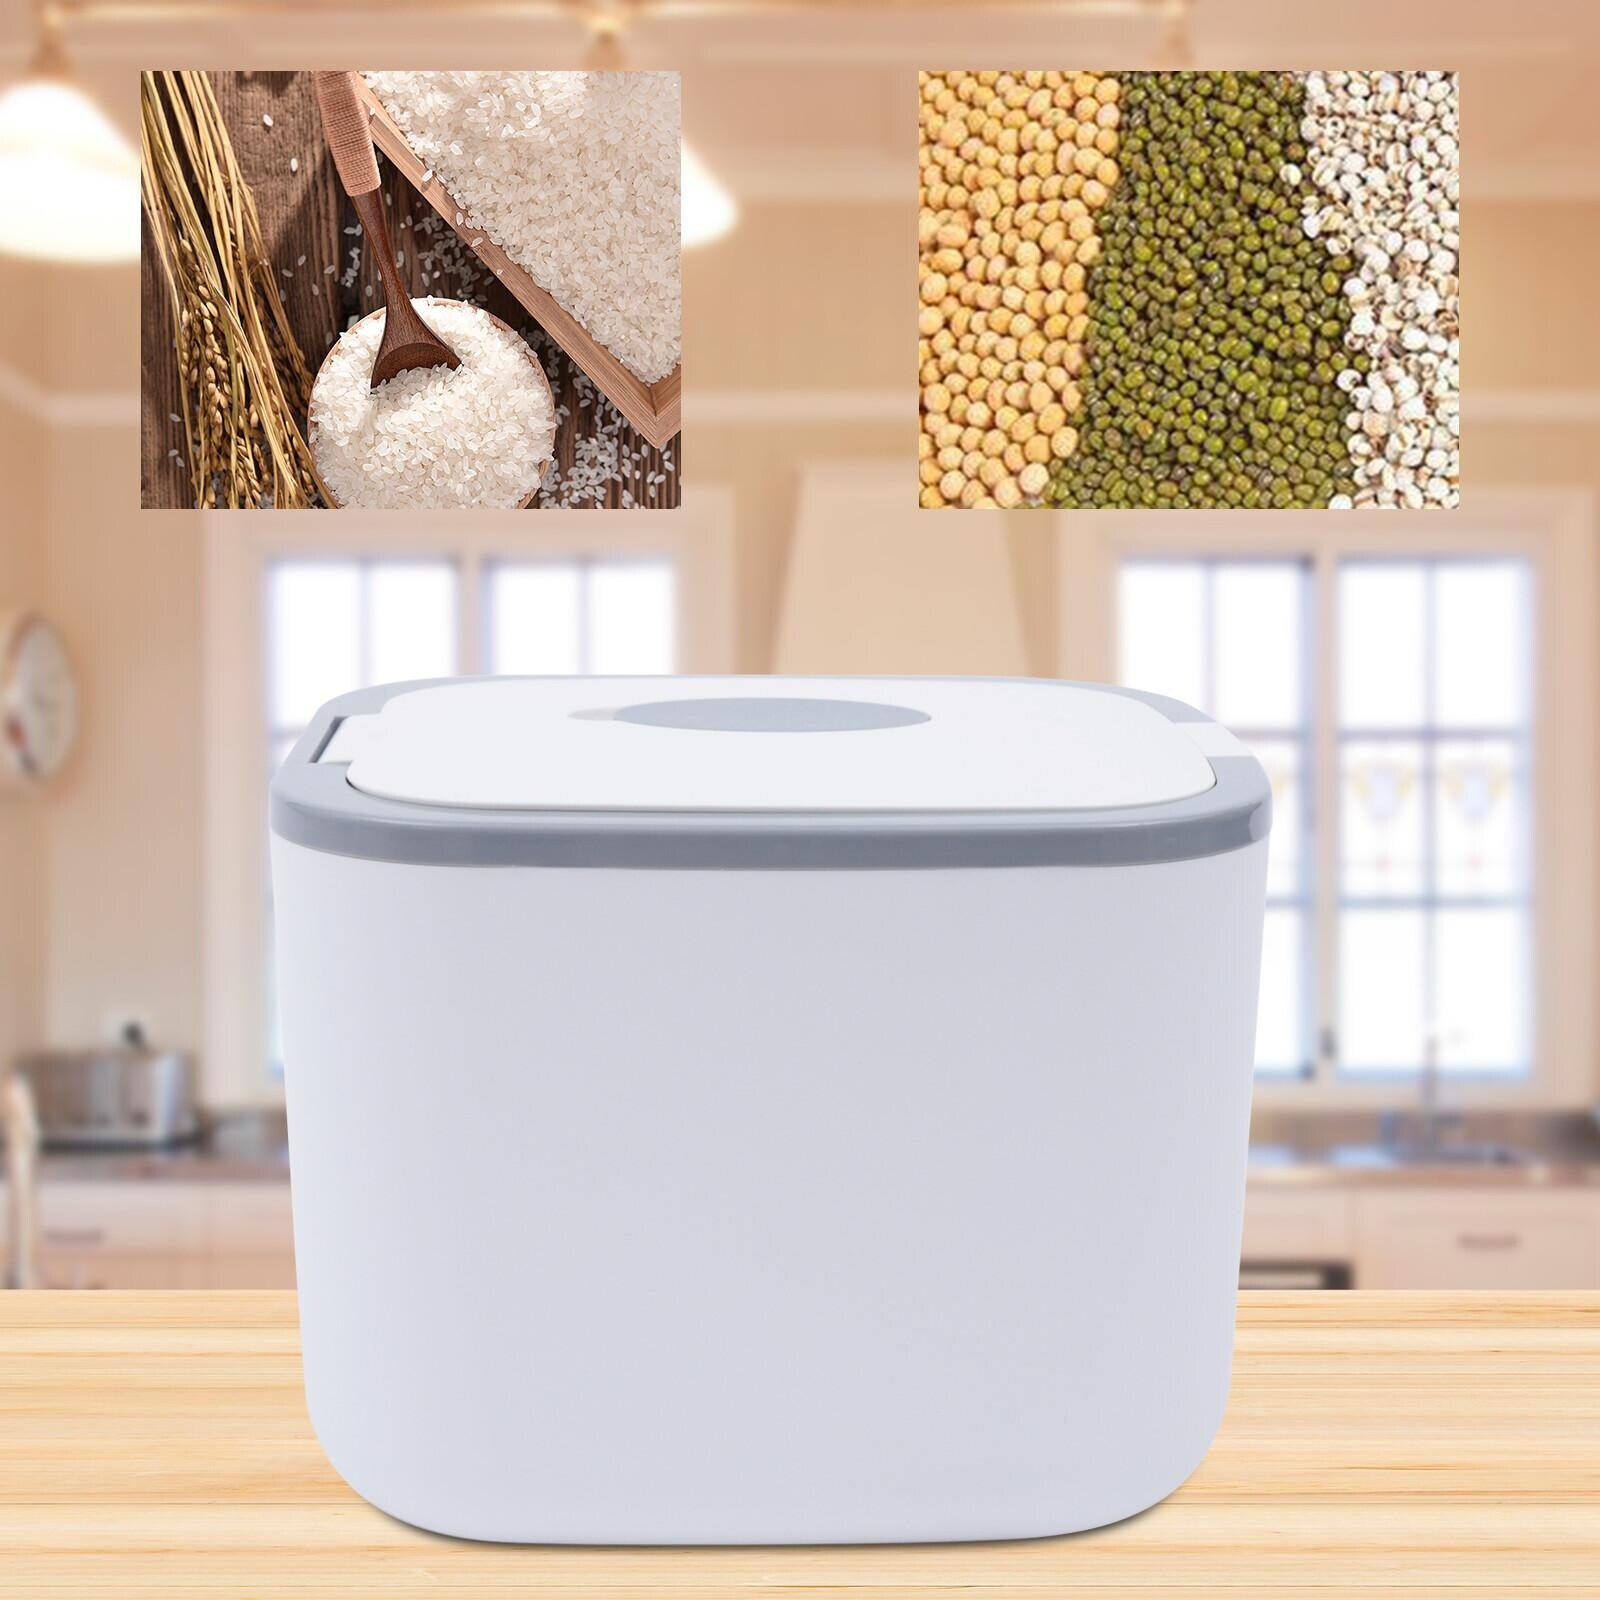 https://ak1.ostkcdn.com/images/products/is/images/direct/941b9f1f92b6587ffbc340bbdb42bcc4cef92dbd/Airtight-Rice-Dispenser-22-Lbs-Automatic-Flip-Cover-Food-Storage-Container.jpg